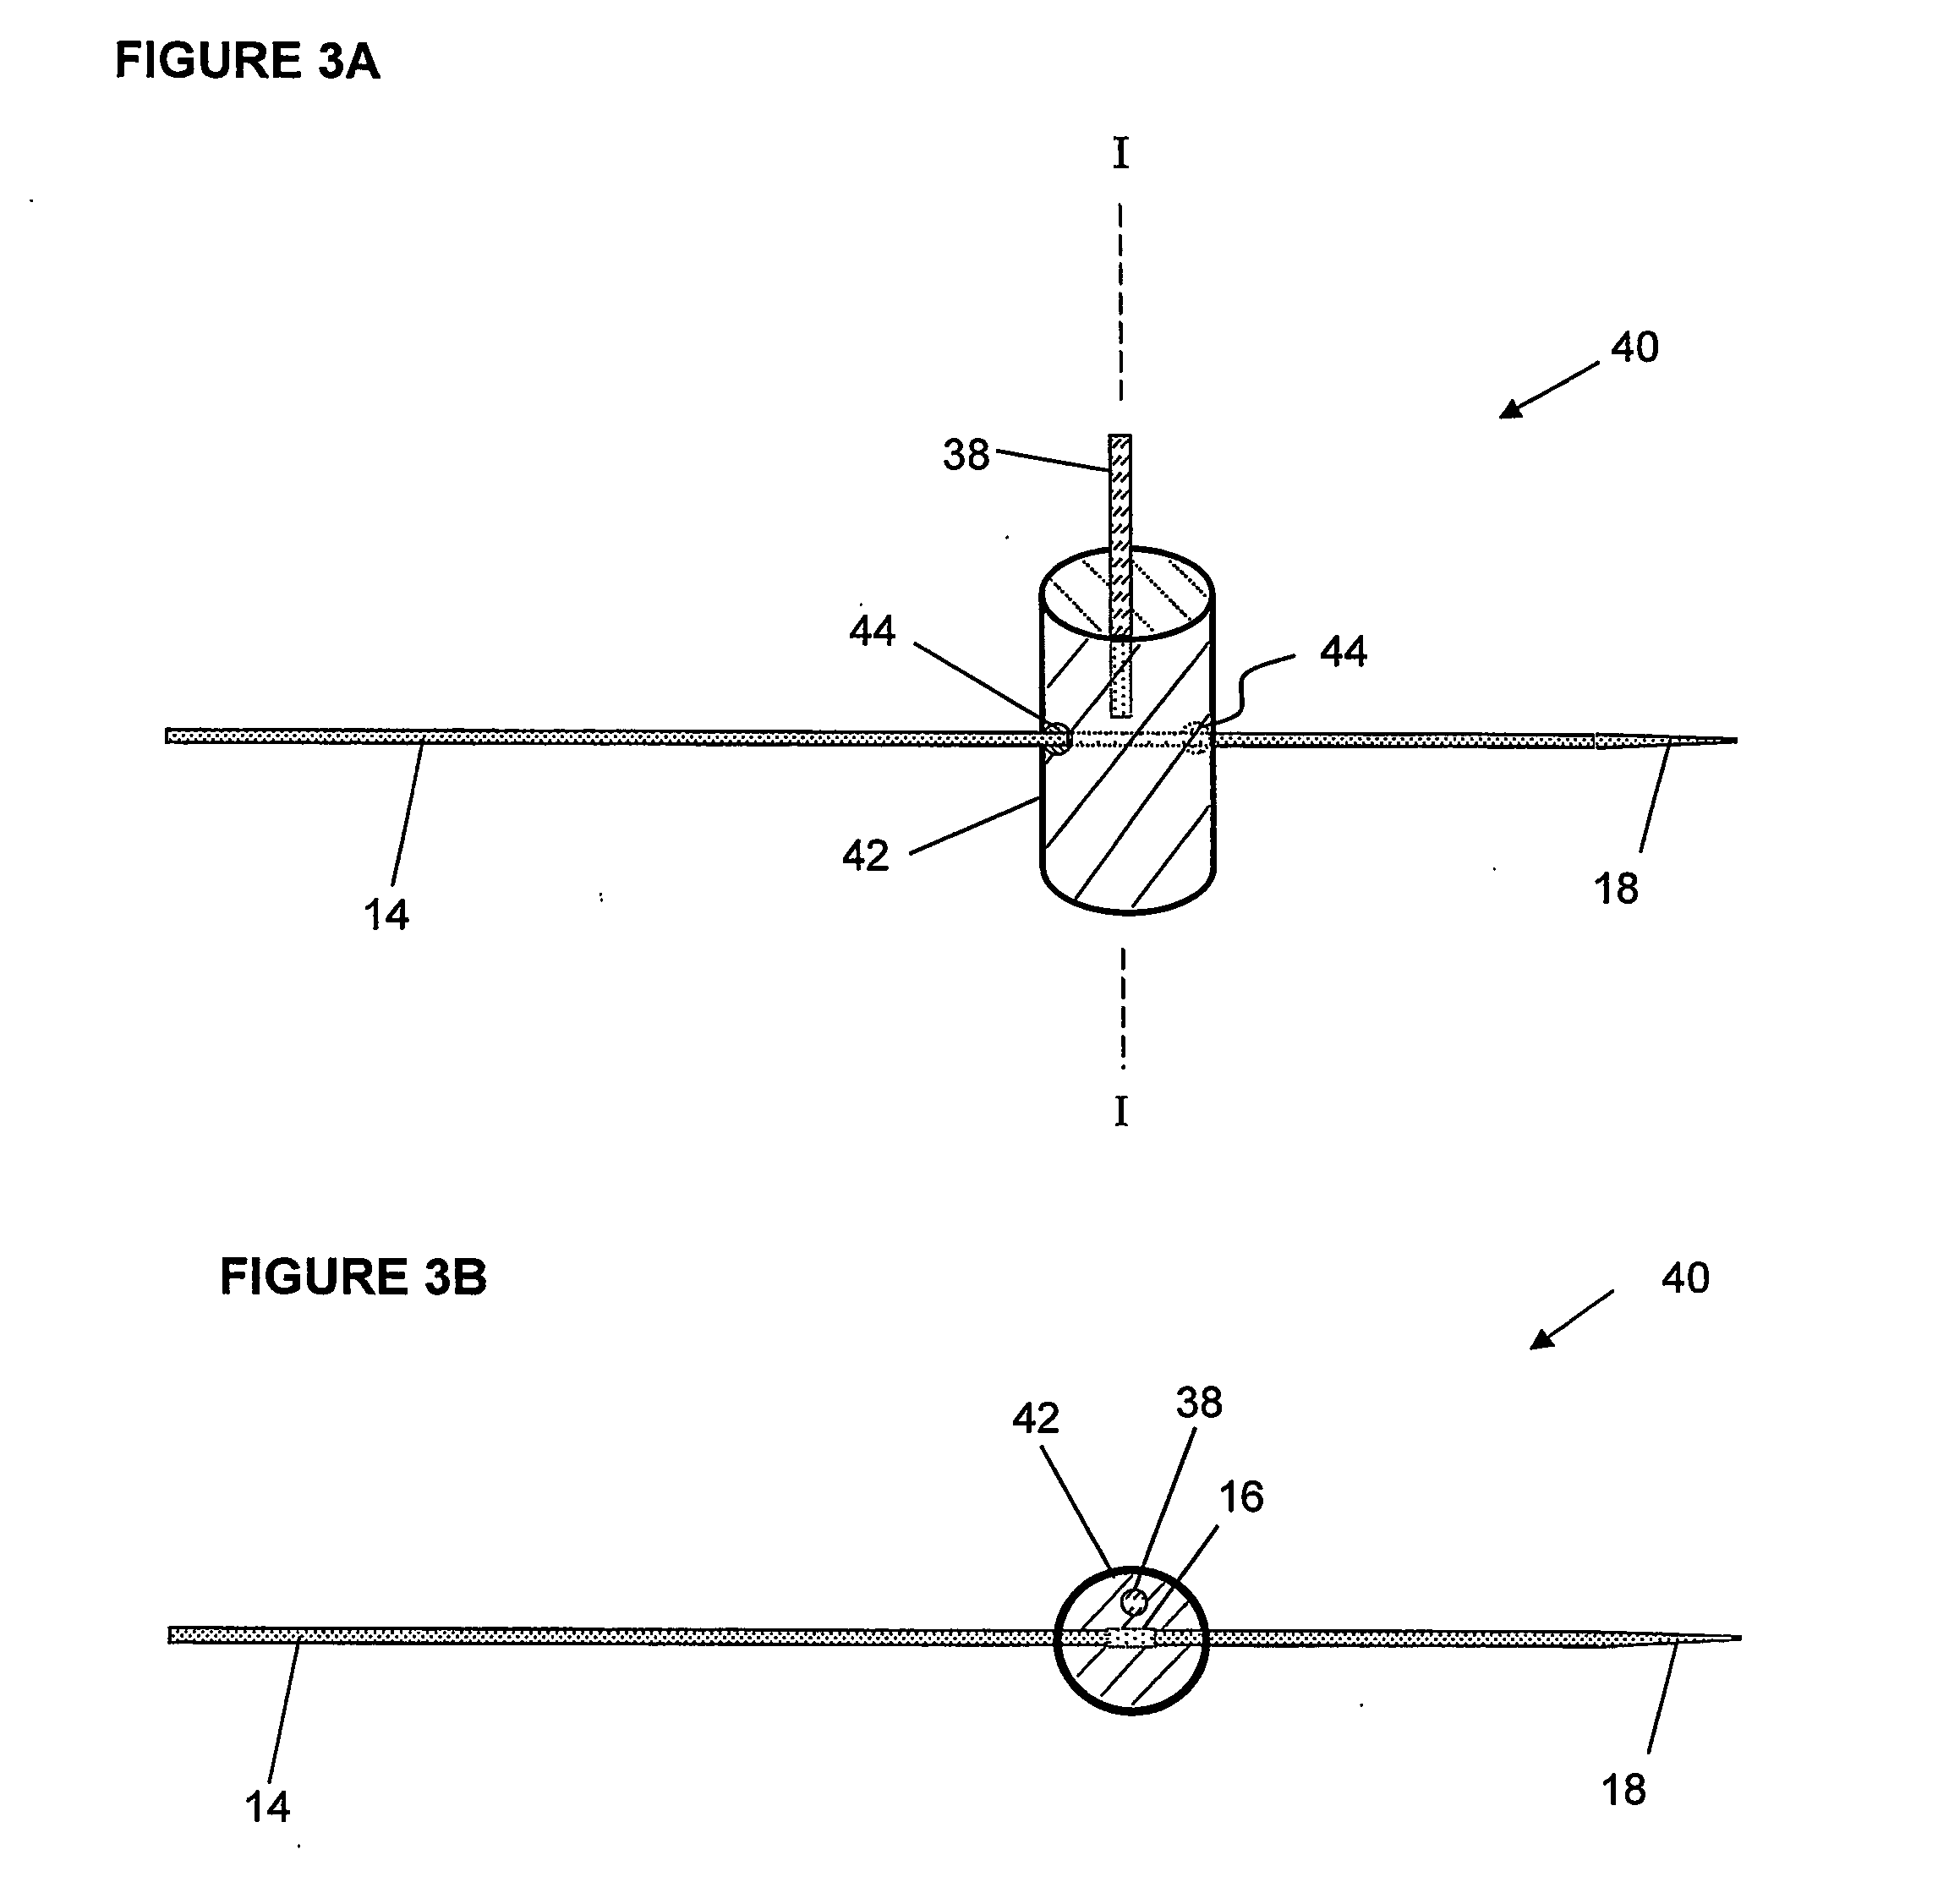 Contiguous capillary electrospray sources and analytical devices